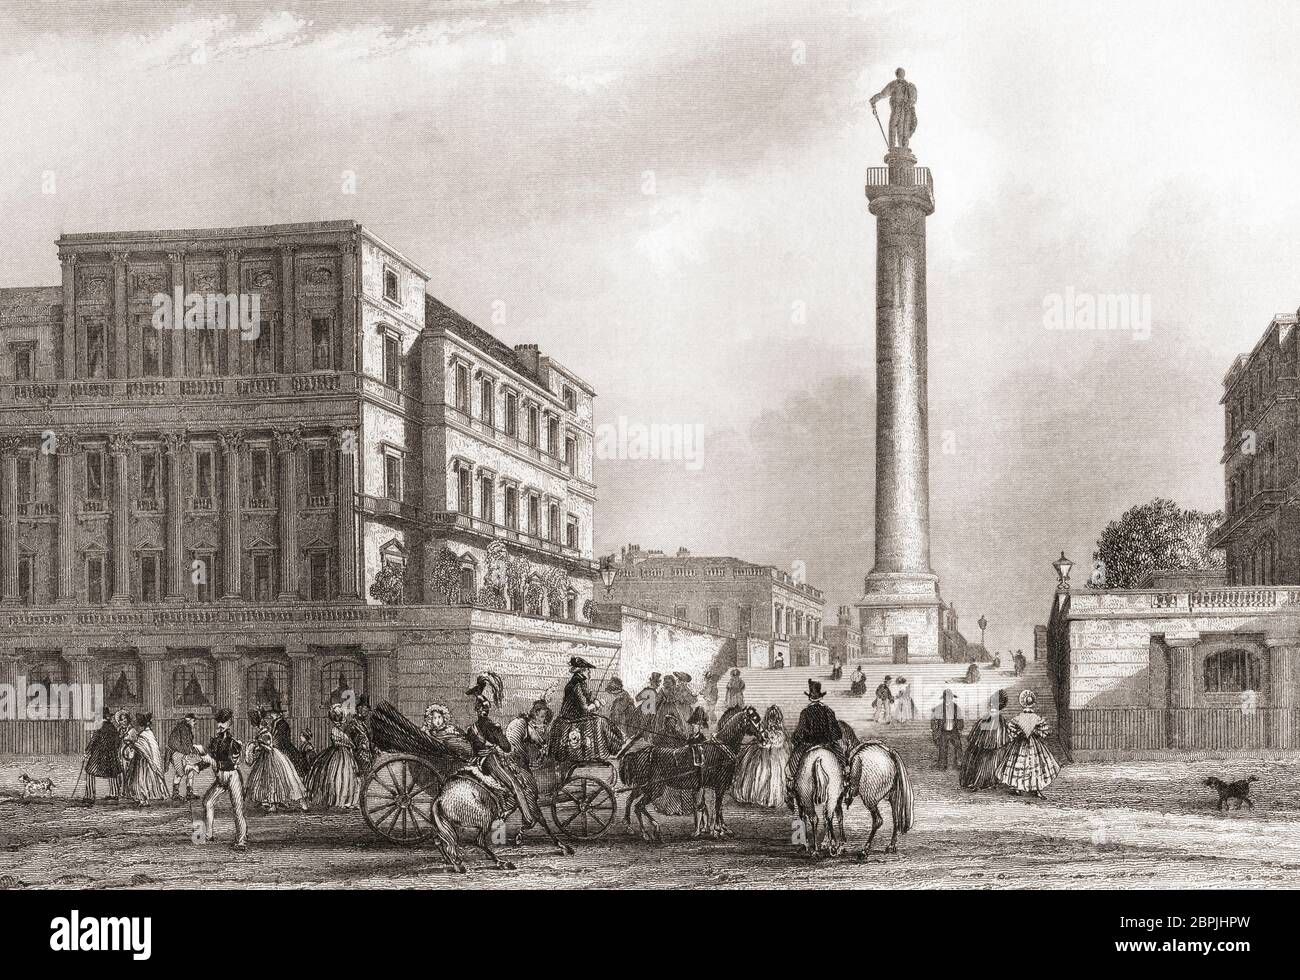 The Duke of York Column, London, England, 19th century.  From The History of London: Illustrated by Views in London and Westminster, published c.1838. Stock Photo